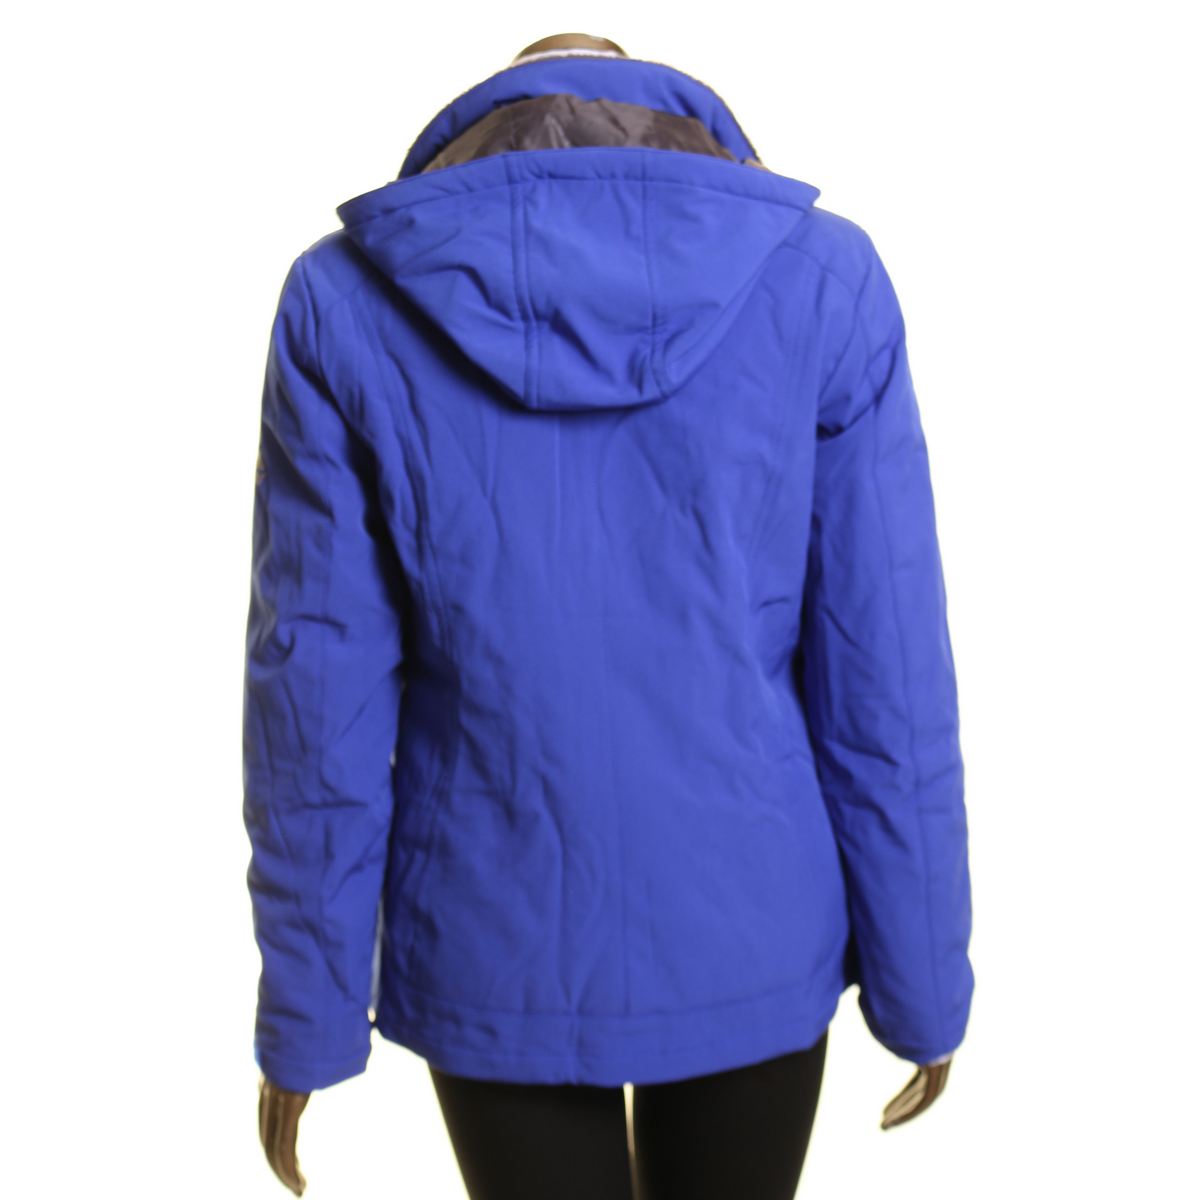 GERRY NEW Women's 3in1 Vault Filled Insulated Hooded Climbing Jacket ...